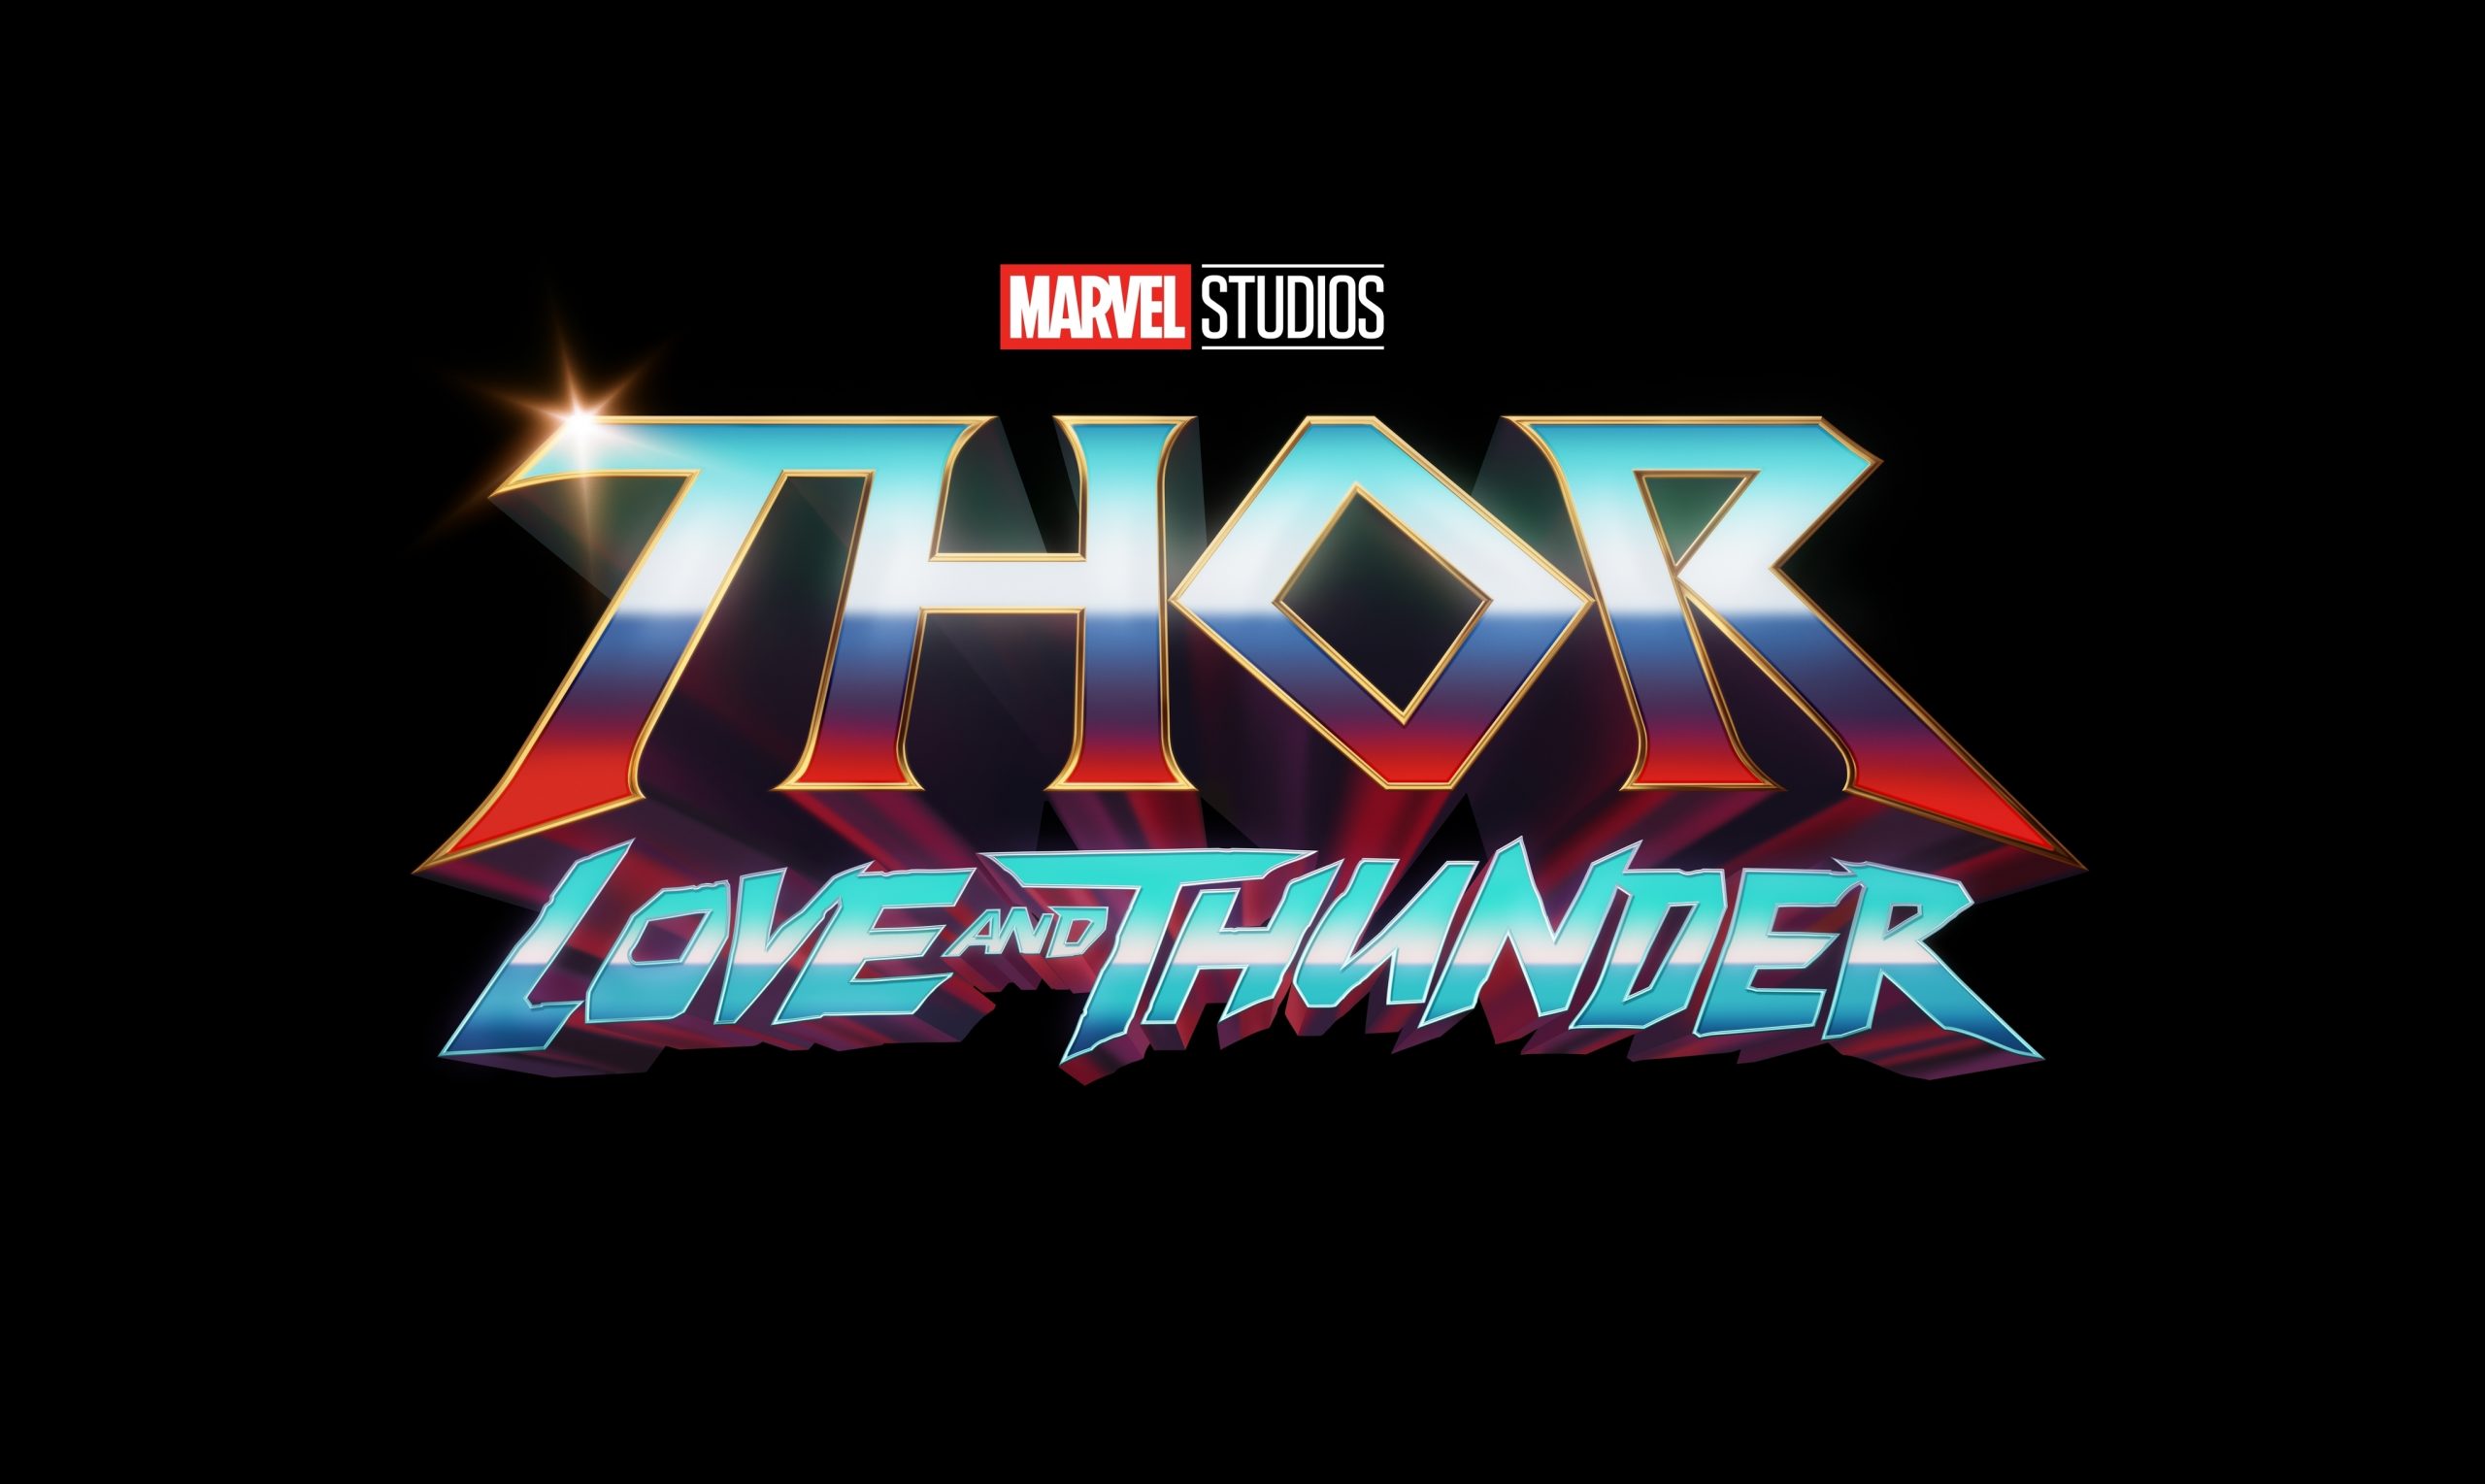 Box Office: 'Thor: Love and Thunder' Stays No. 1 in Second Weekend